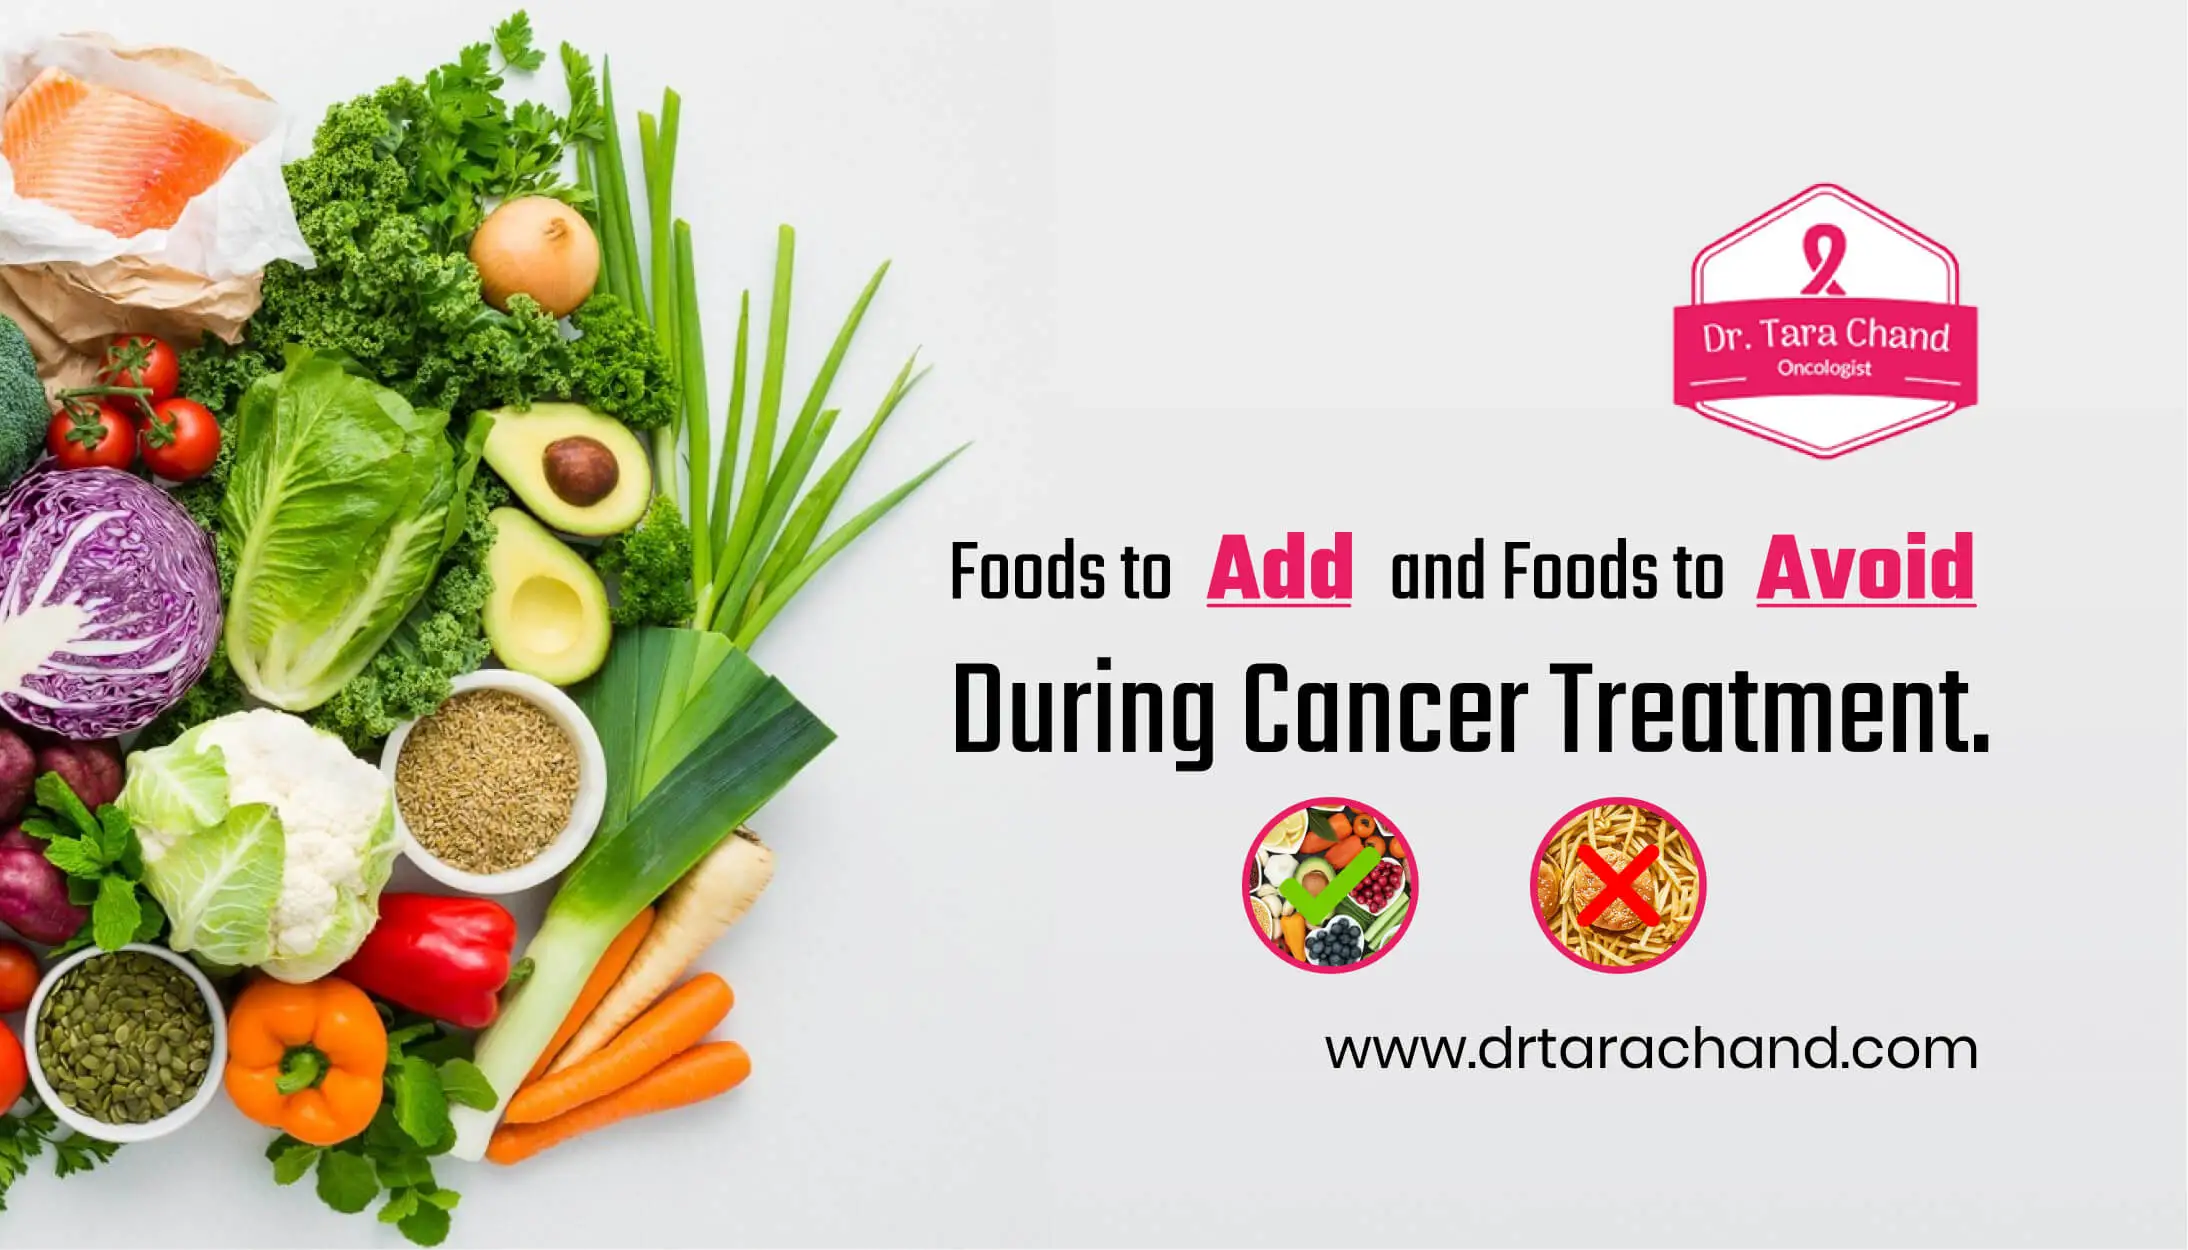 Foods to Add and Avoid During Cancer Treatment!